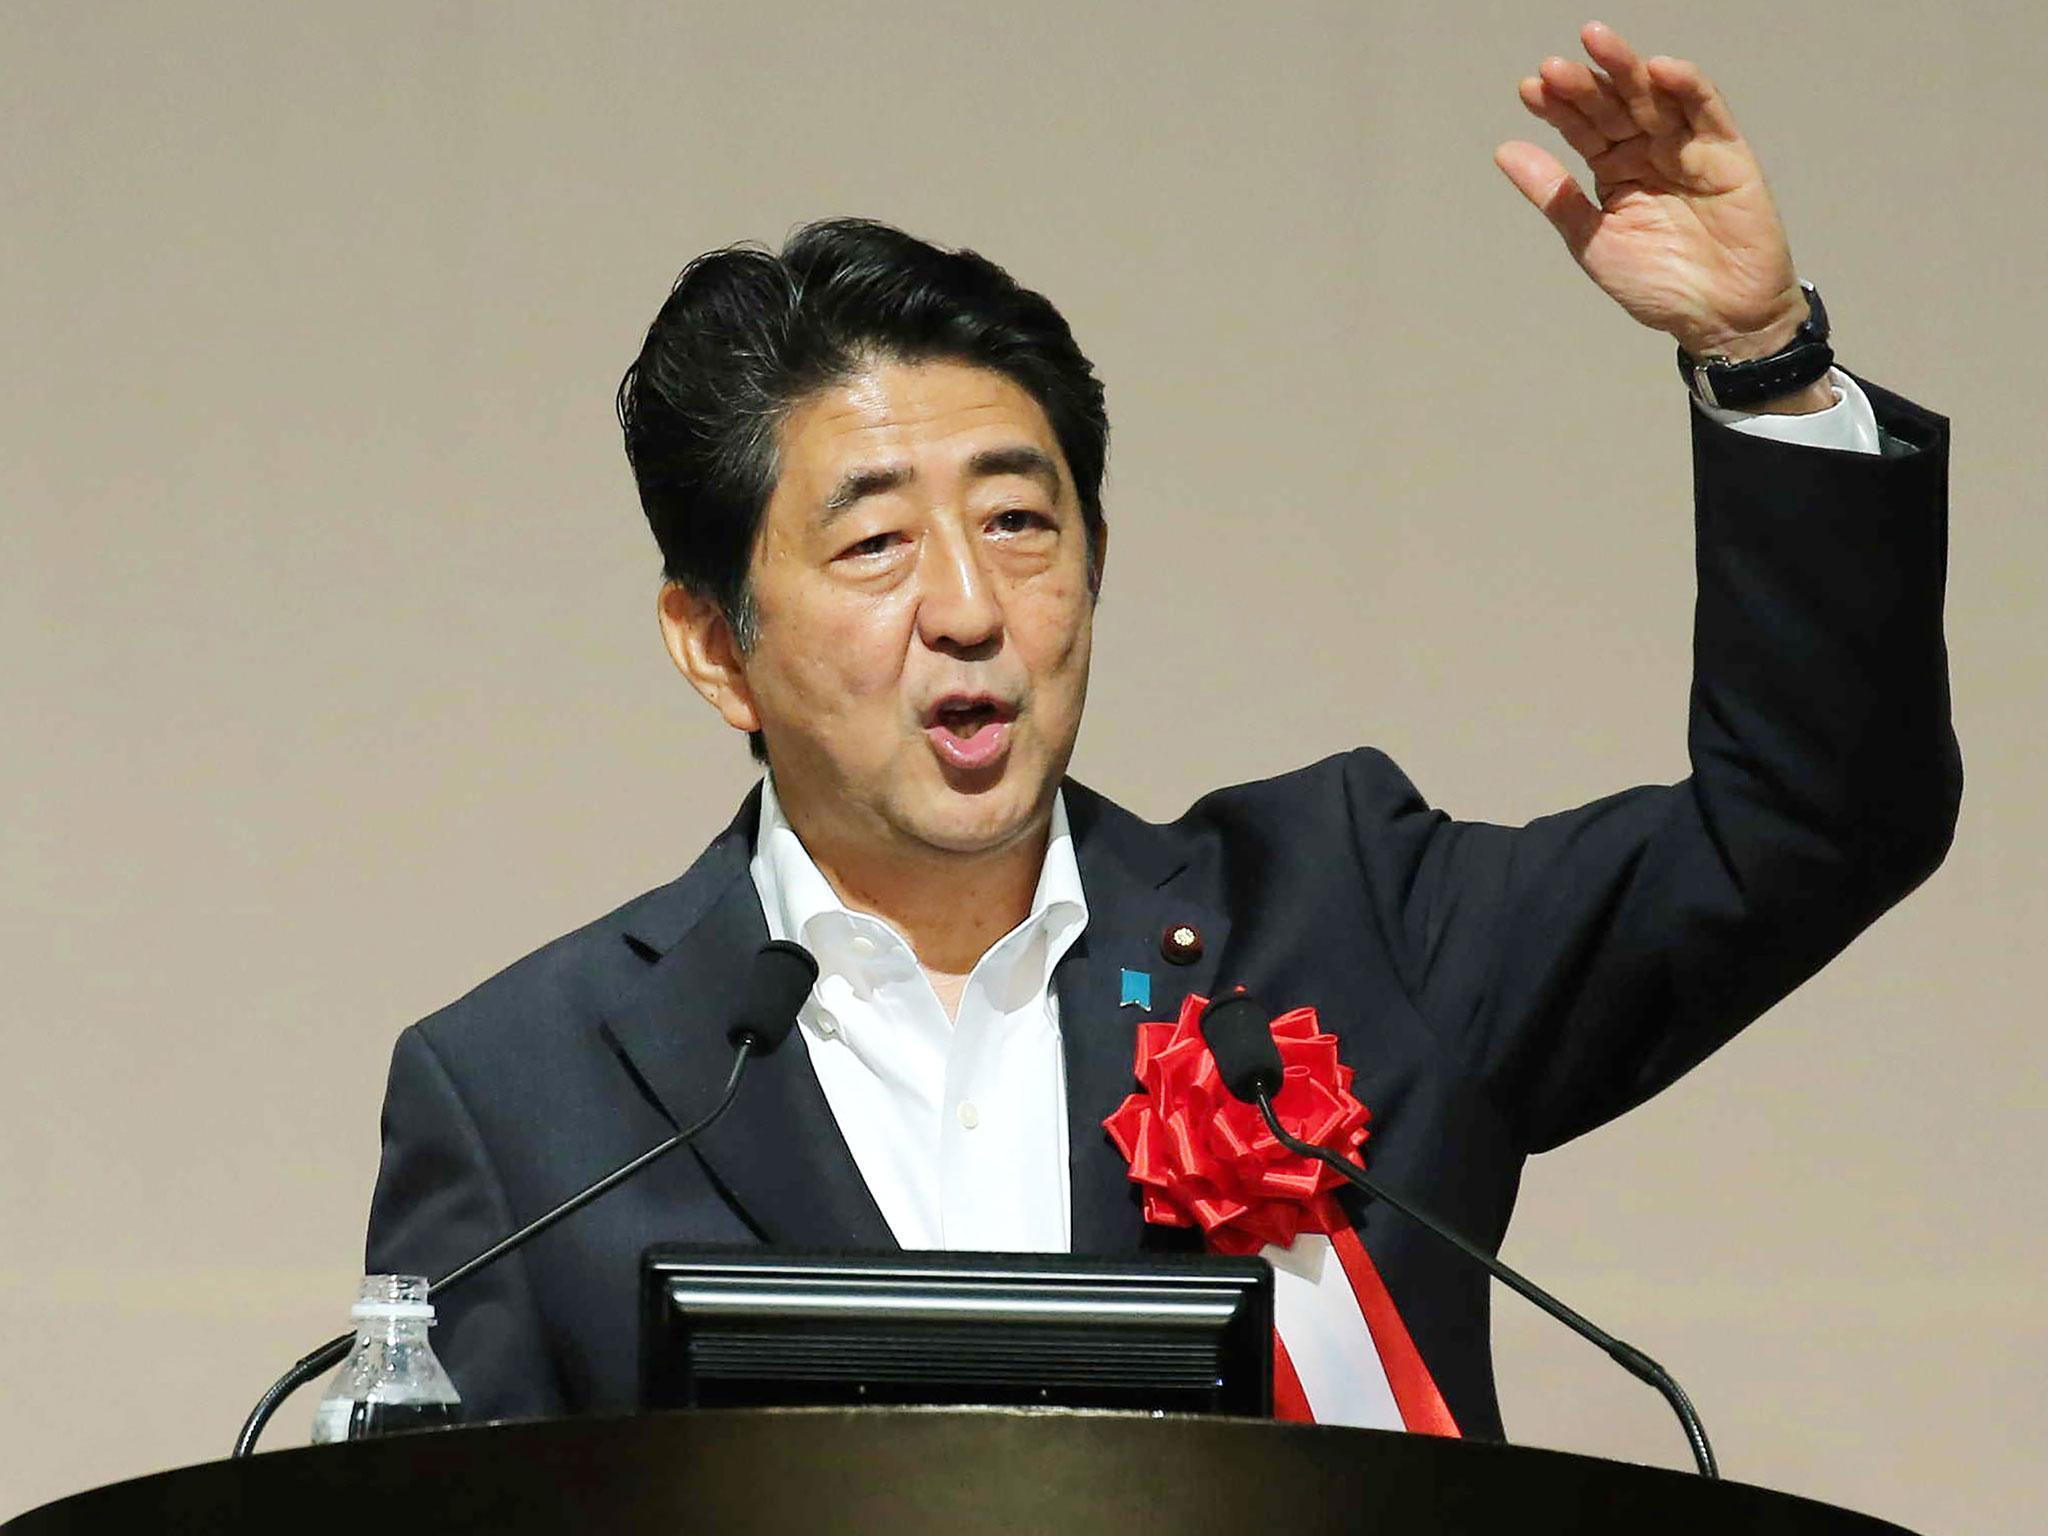 Japanese Prime Minister Shinzo Abe appears to be celebrating Donald Trump's victory